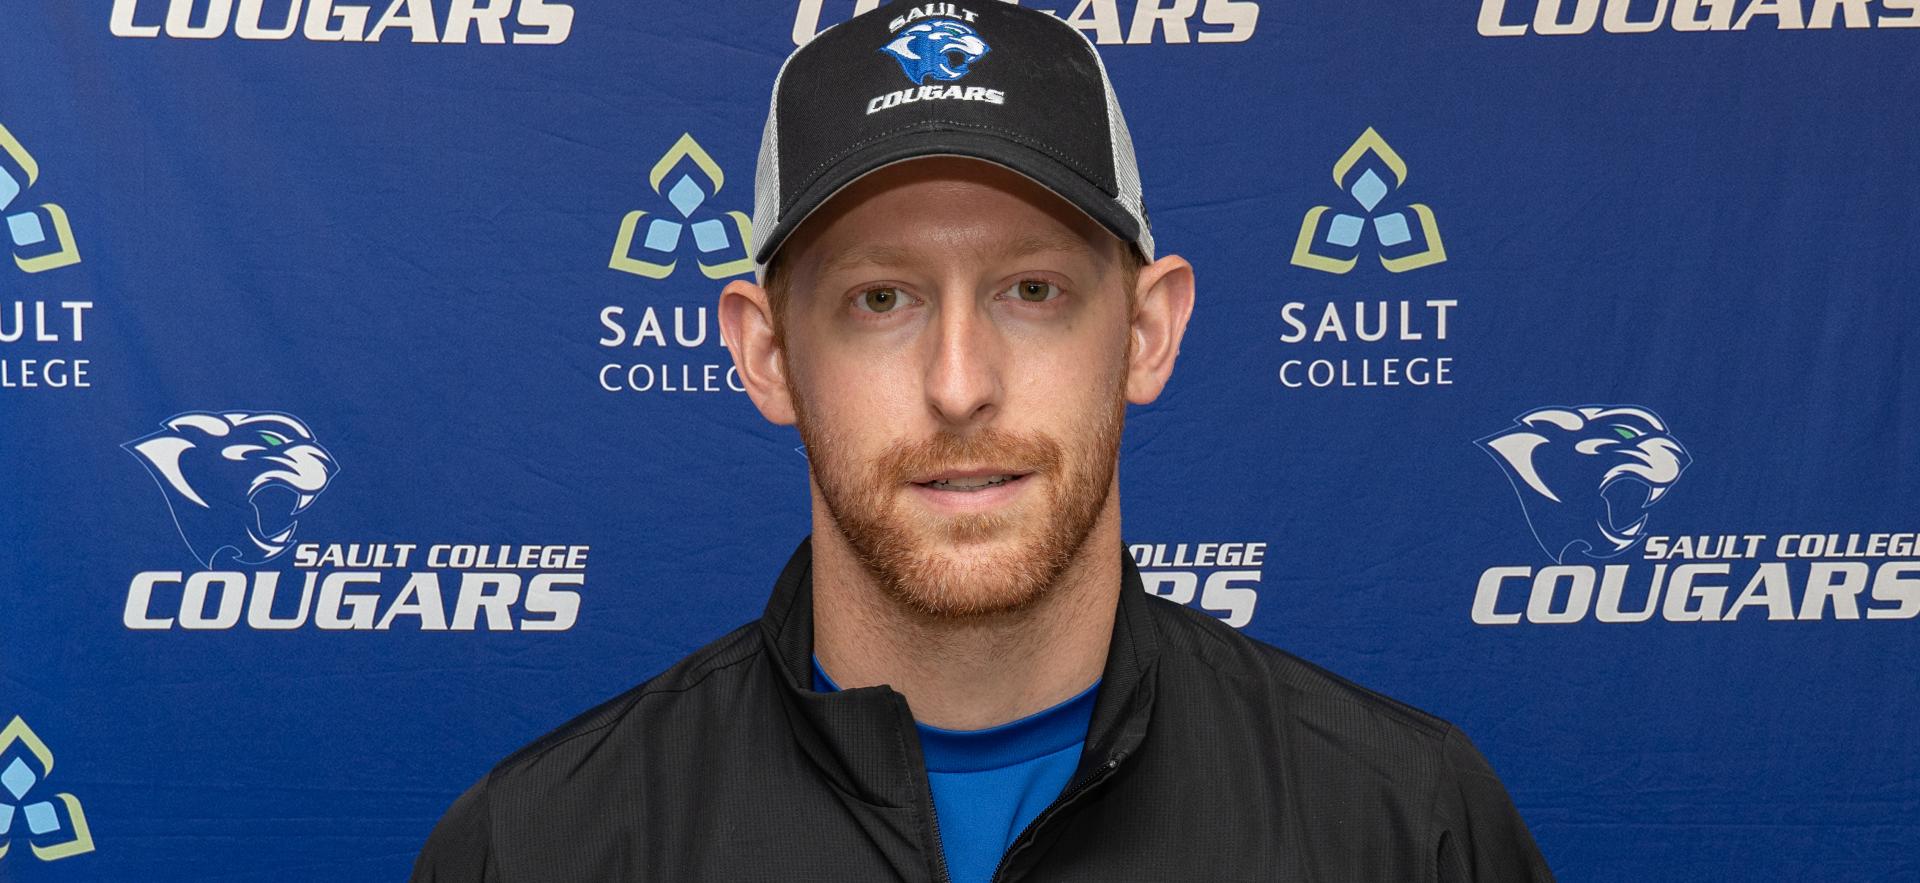 man with beard Sault College cougars black ball cap and jacket standing in front of Sault College cougars backdrop